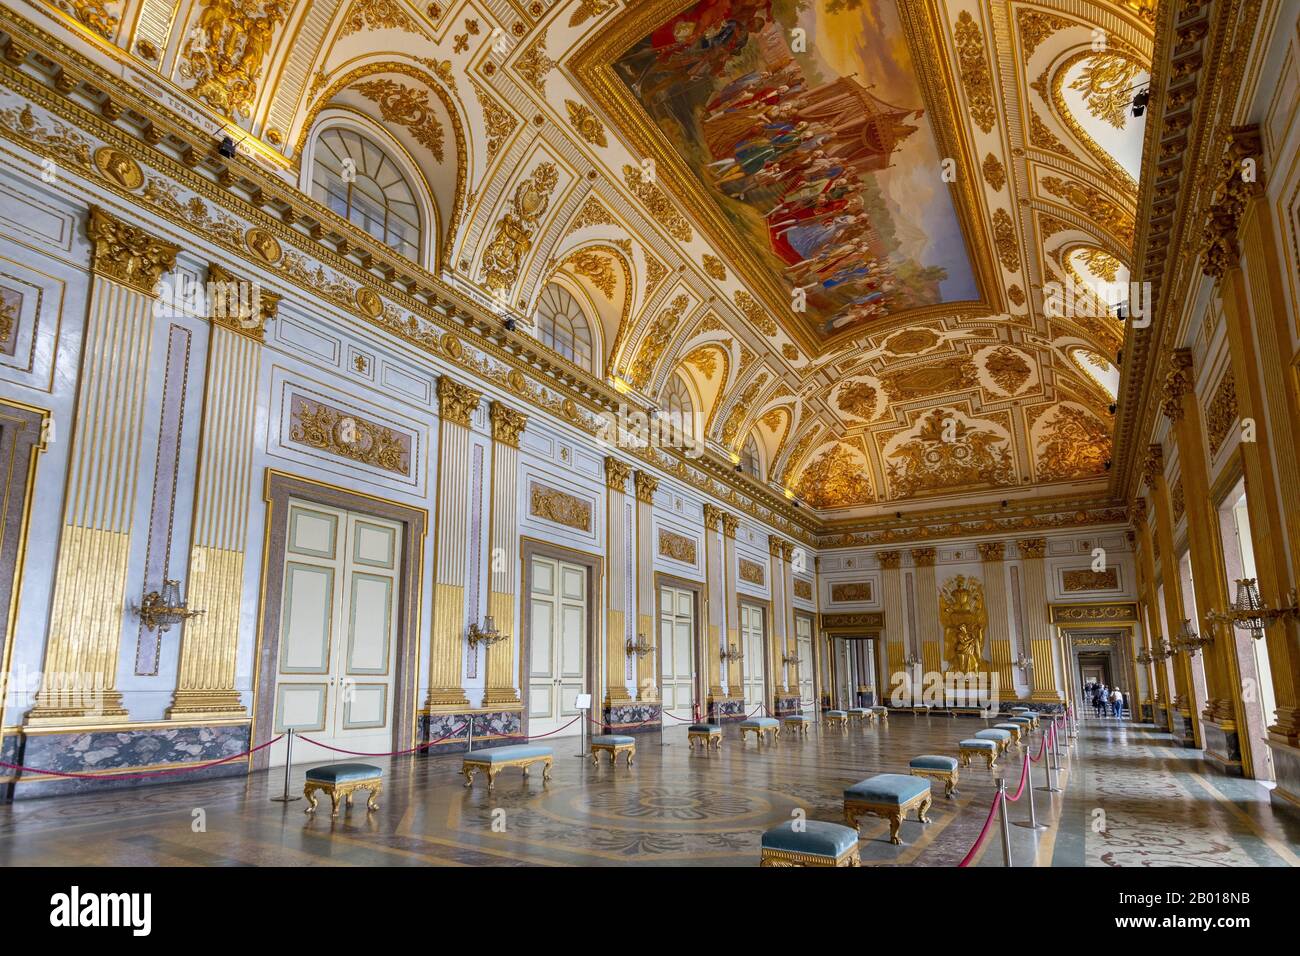 The throne room in the Royal Palace of Caserta, Italy. Stock Photo